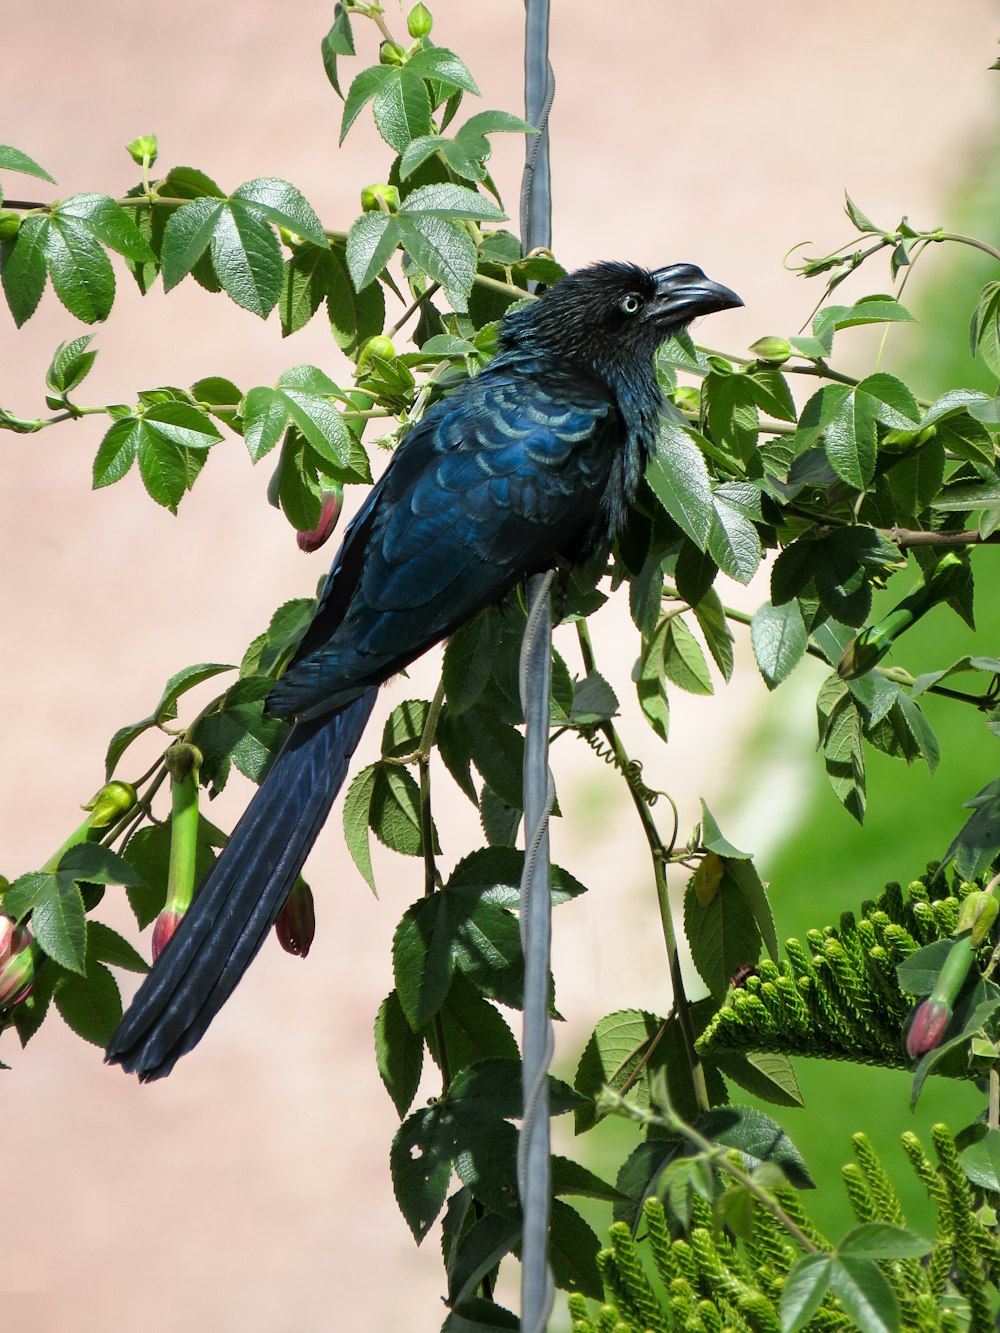 blue and black bird on tree branch during daytime